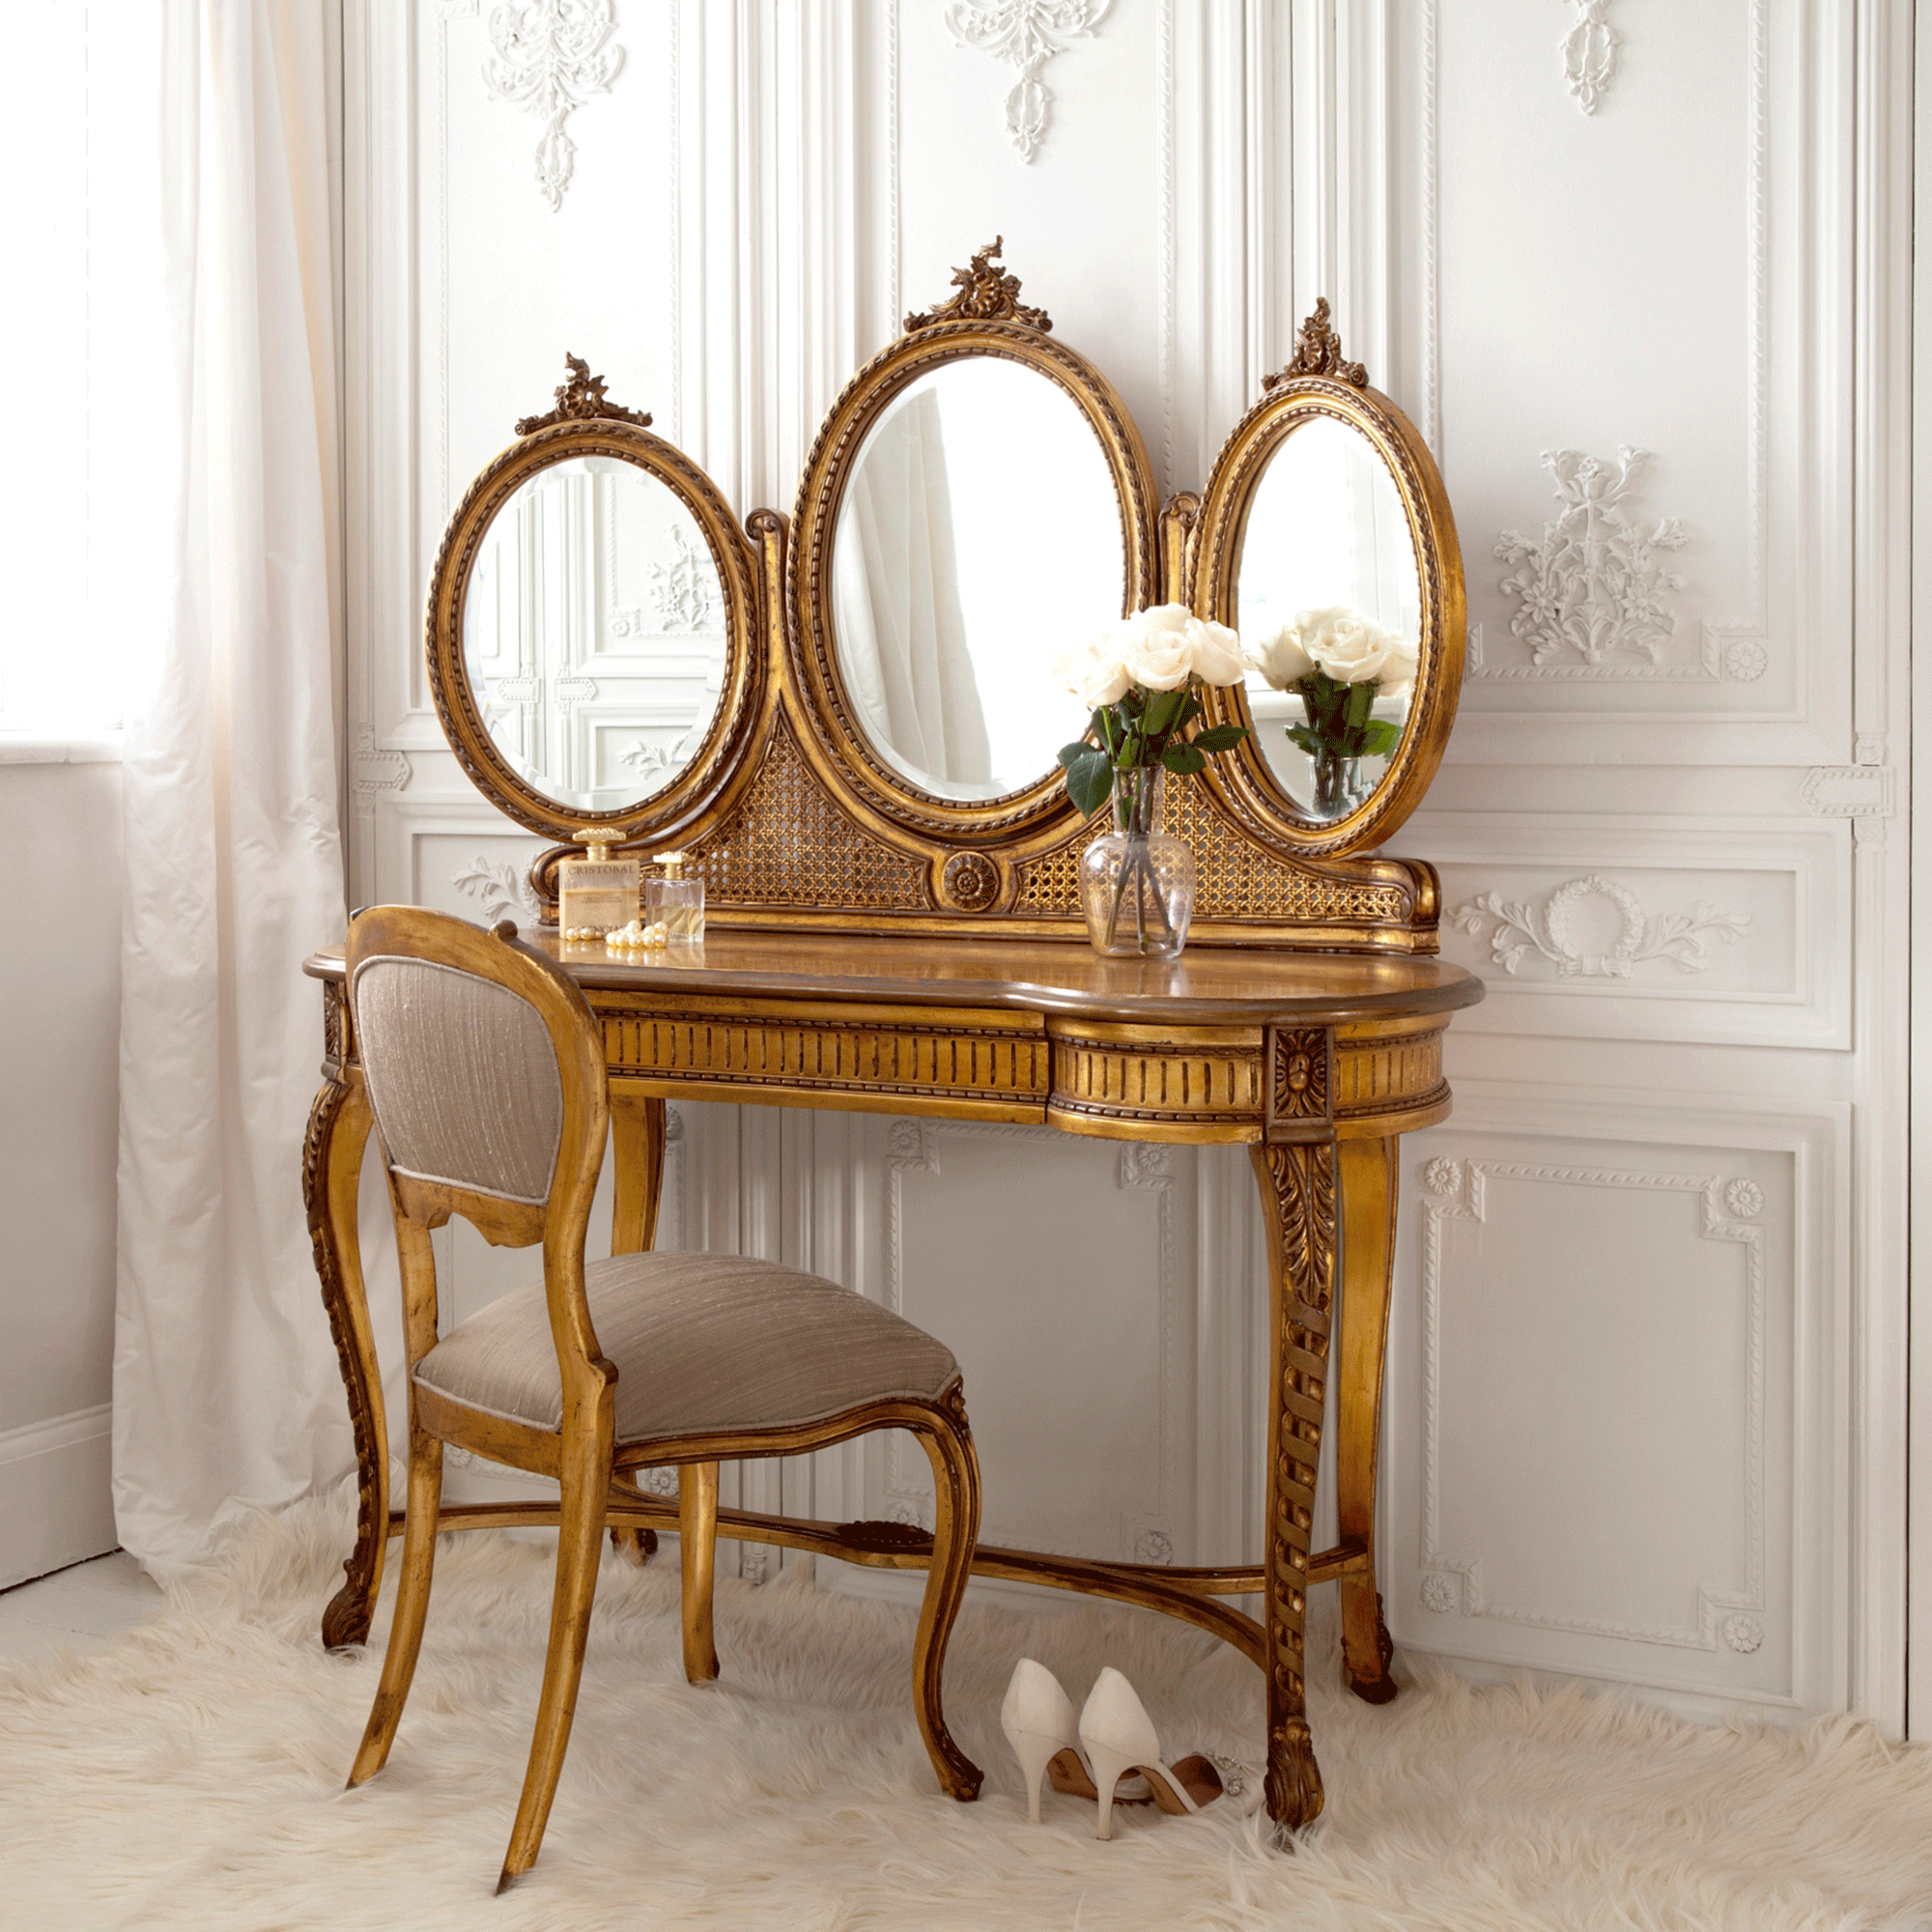 Gold dressing table with mirrors